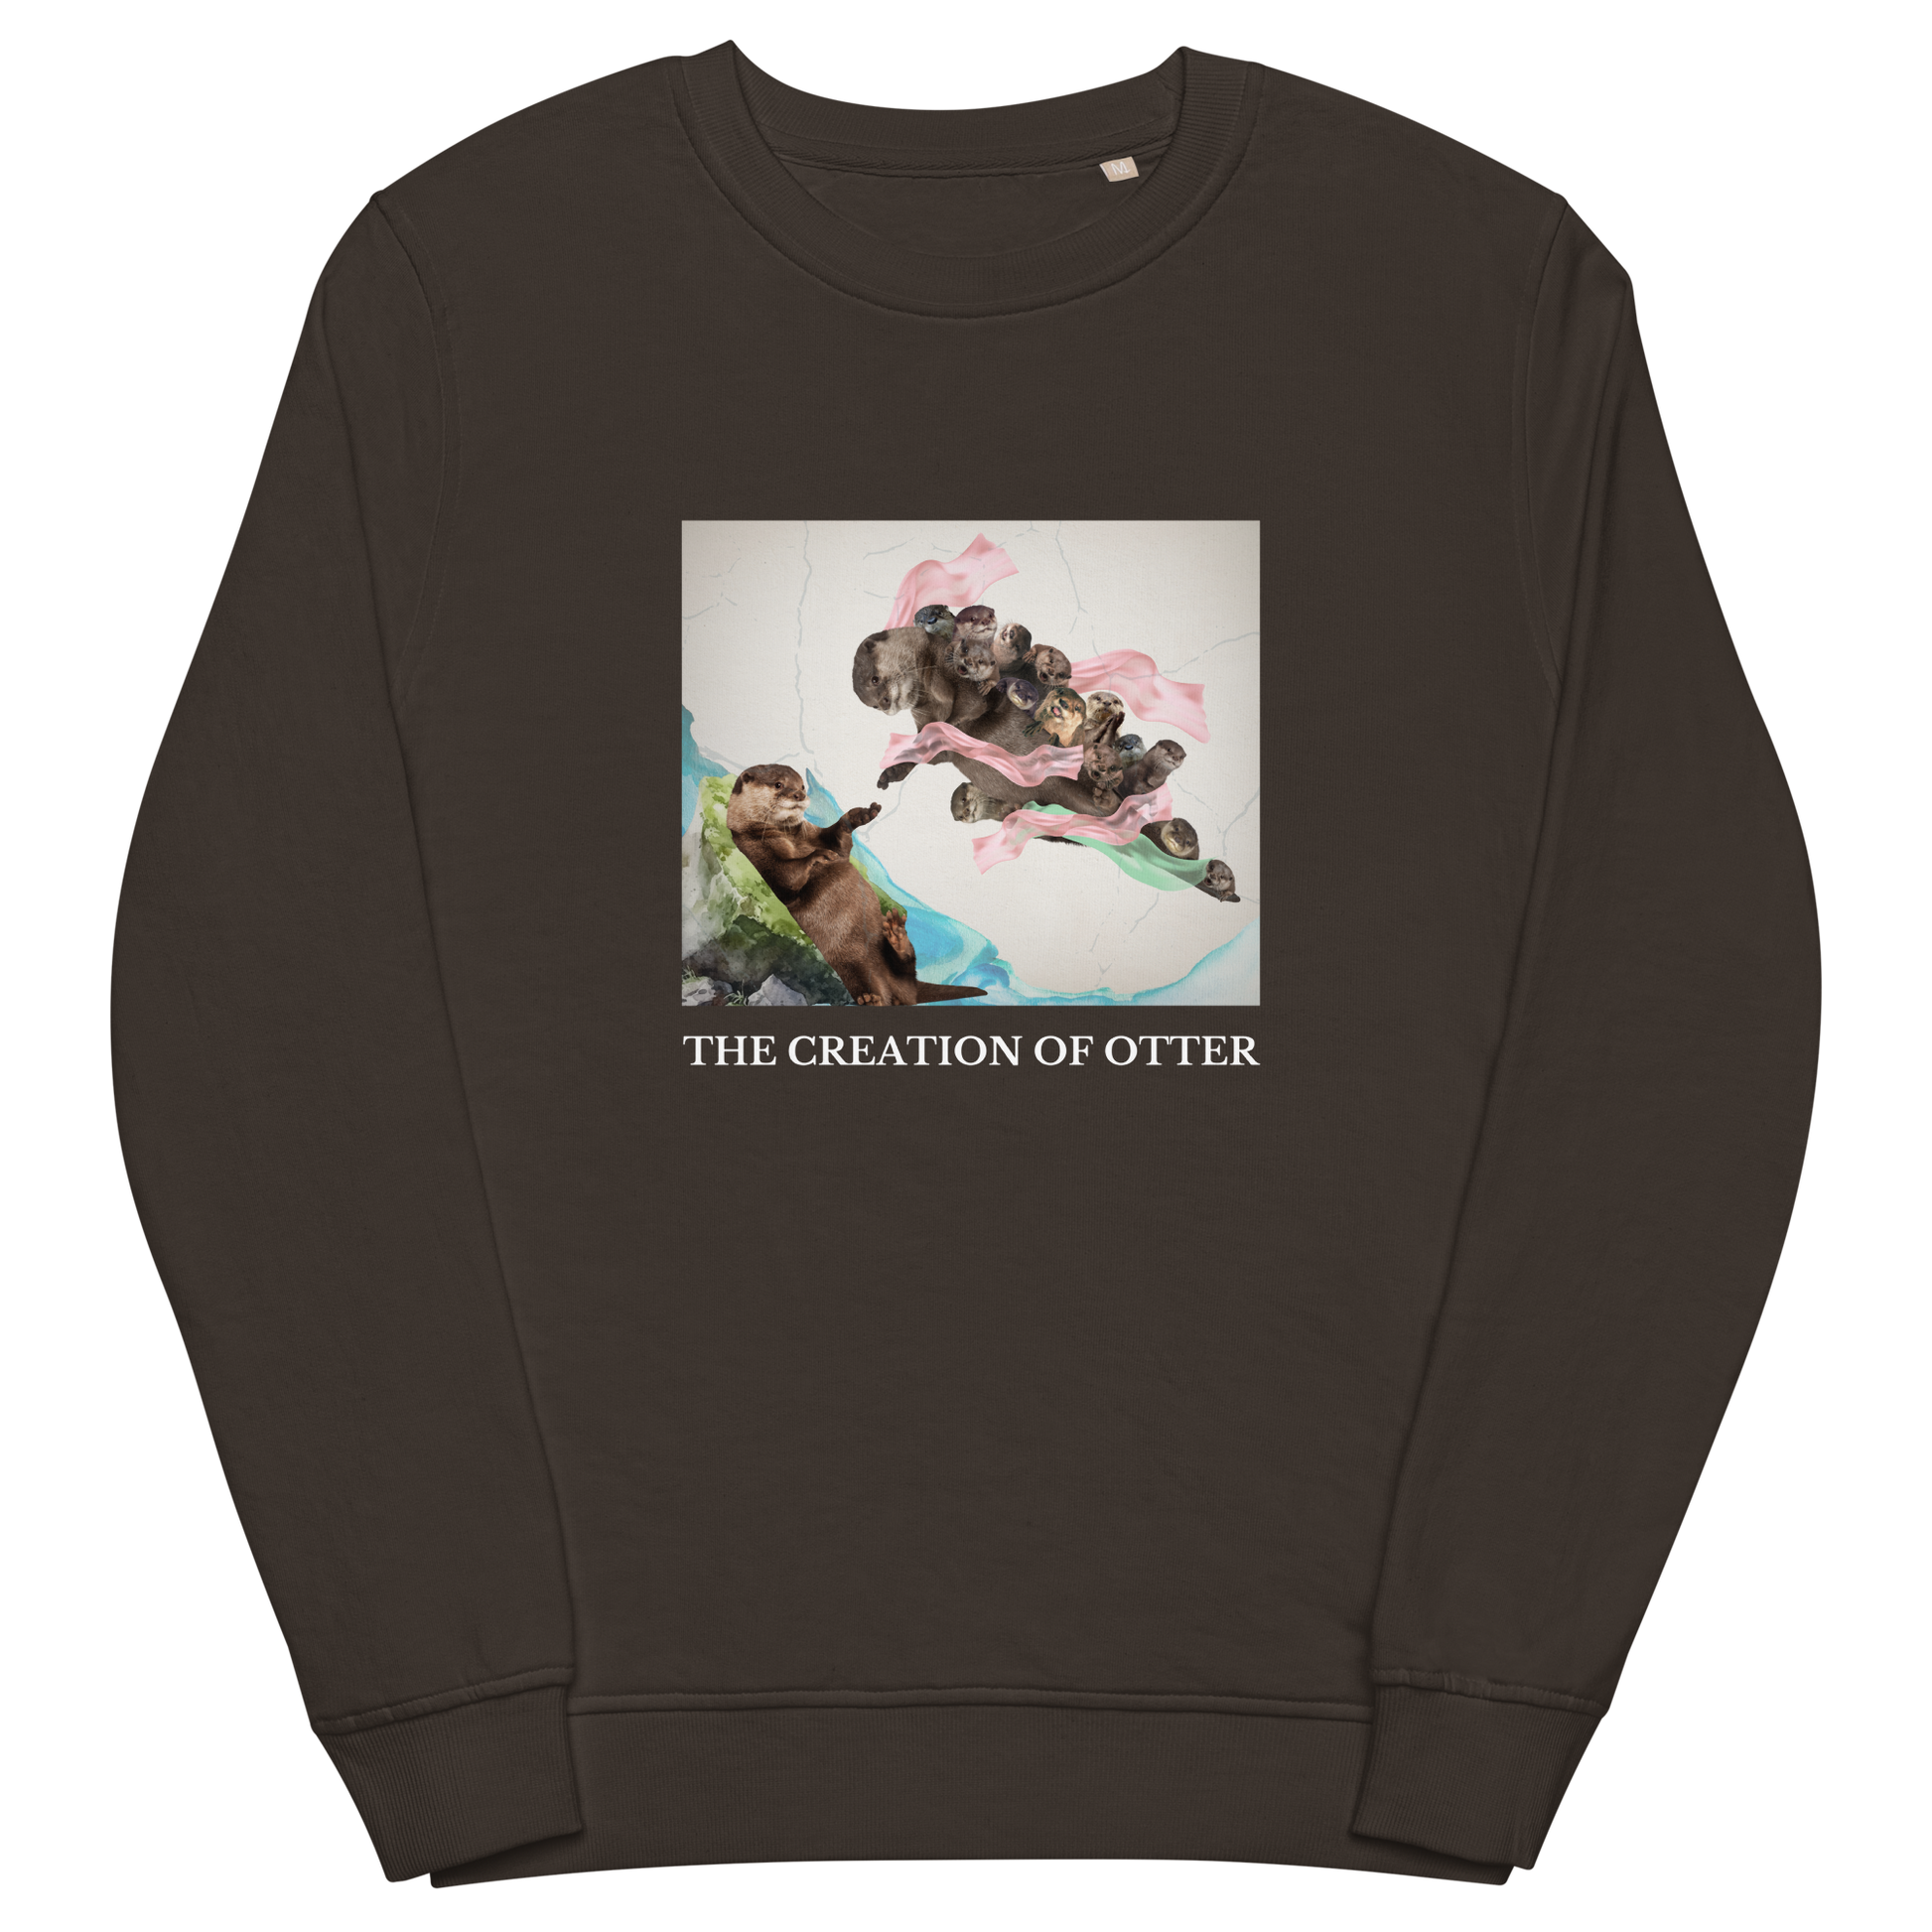 Deep Charcoal Grey Organic Otter Sweatshirt featuring a playful The Creation of Otter parody of Michelangelo's masterpiece - Artsy/Funny Graphic Otter Sweatshirts - Boozy Fox